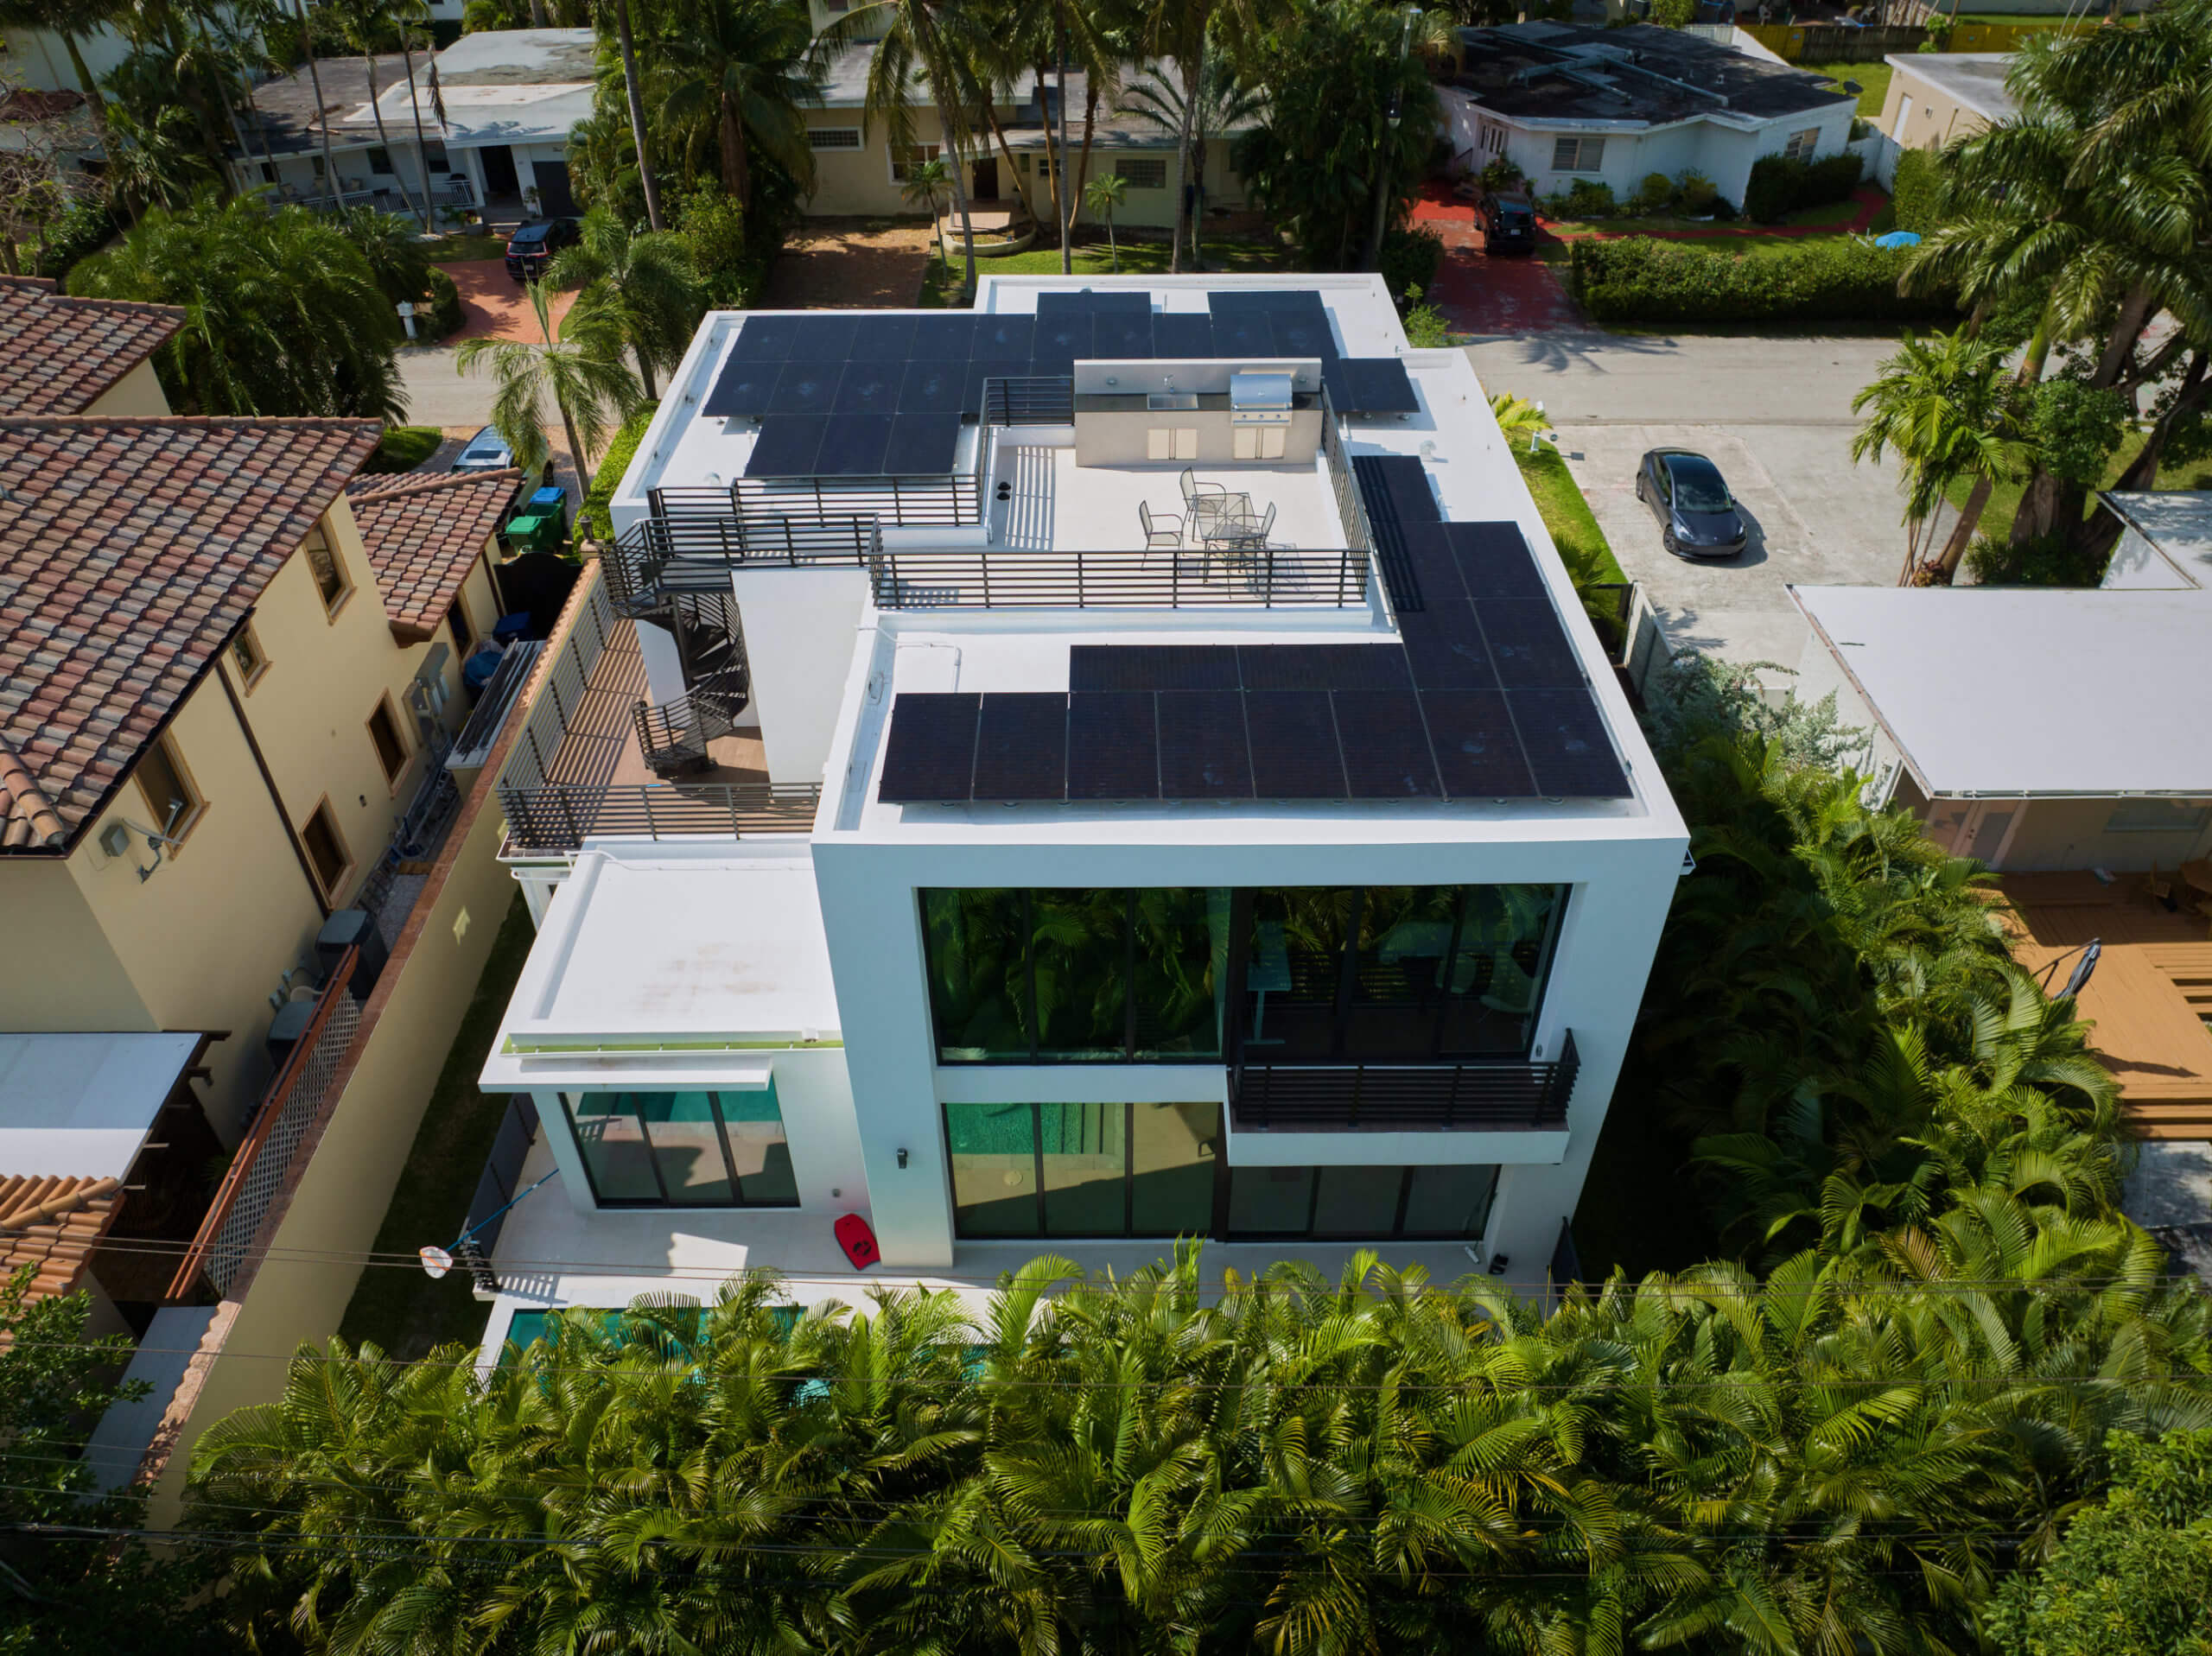 Home Solar Systems in South Florida